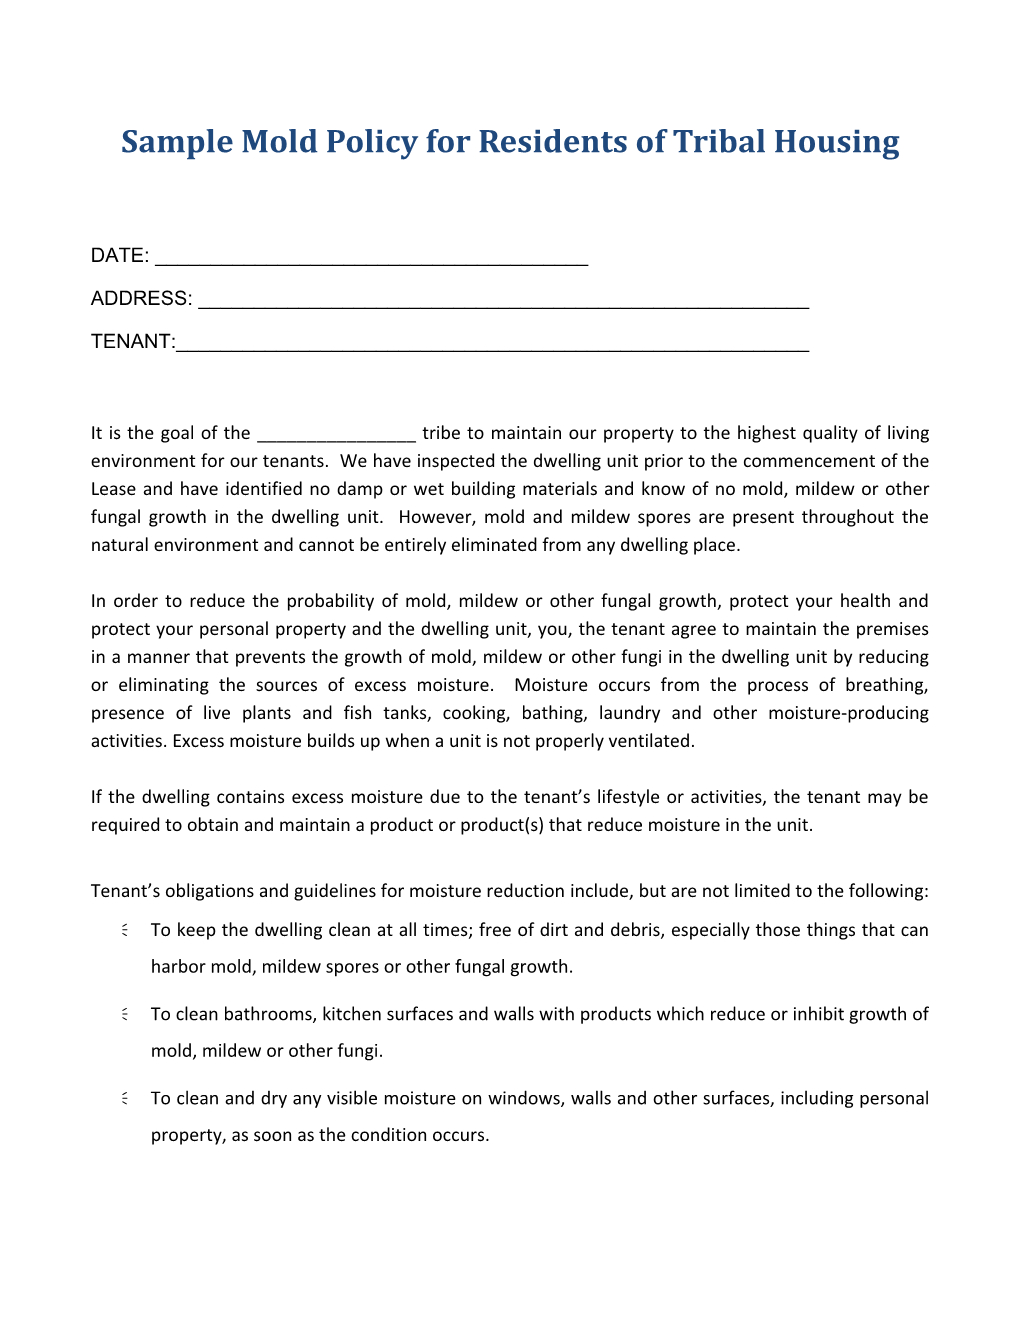 Sample Mold Policy for Residents of Tribal Housing